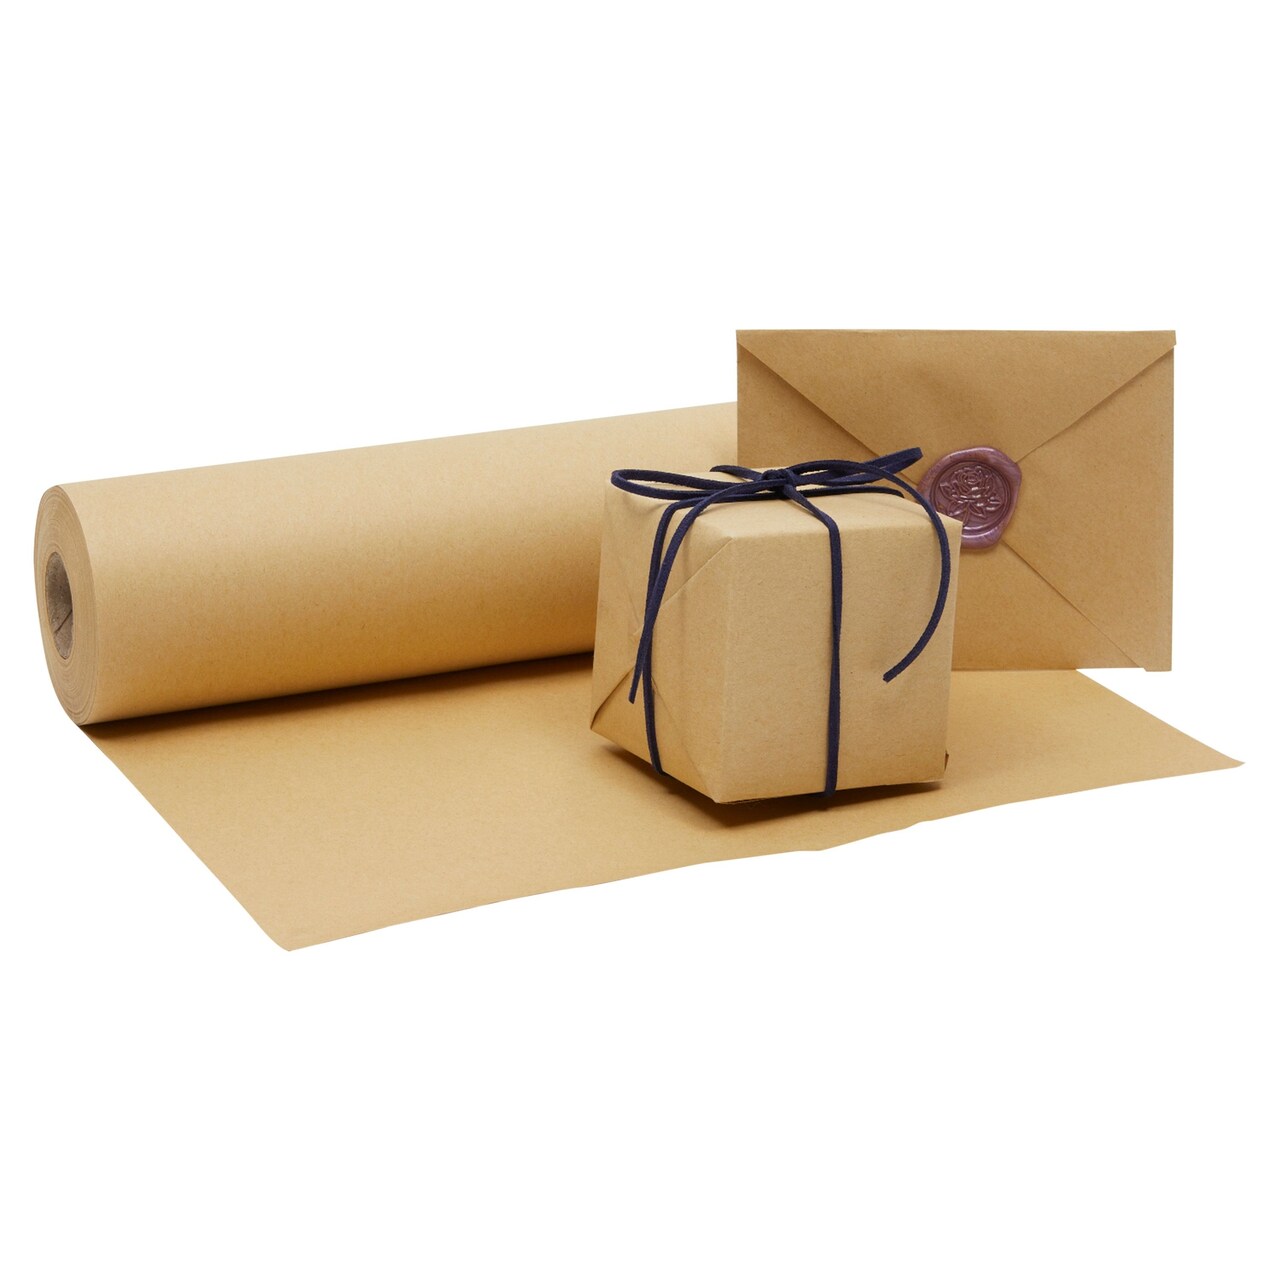 Kraft Paper Roll for Gift Wrapping, Moving, Packing, Plain Brown Shipping Paper for Arts and Crafts, Bulletin Board Easel, DIY Projects (12 x 1200 Inches, 100 Feet)